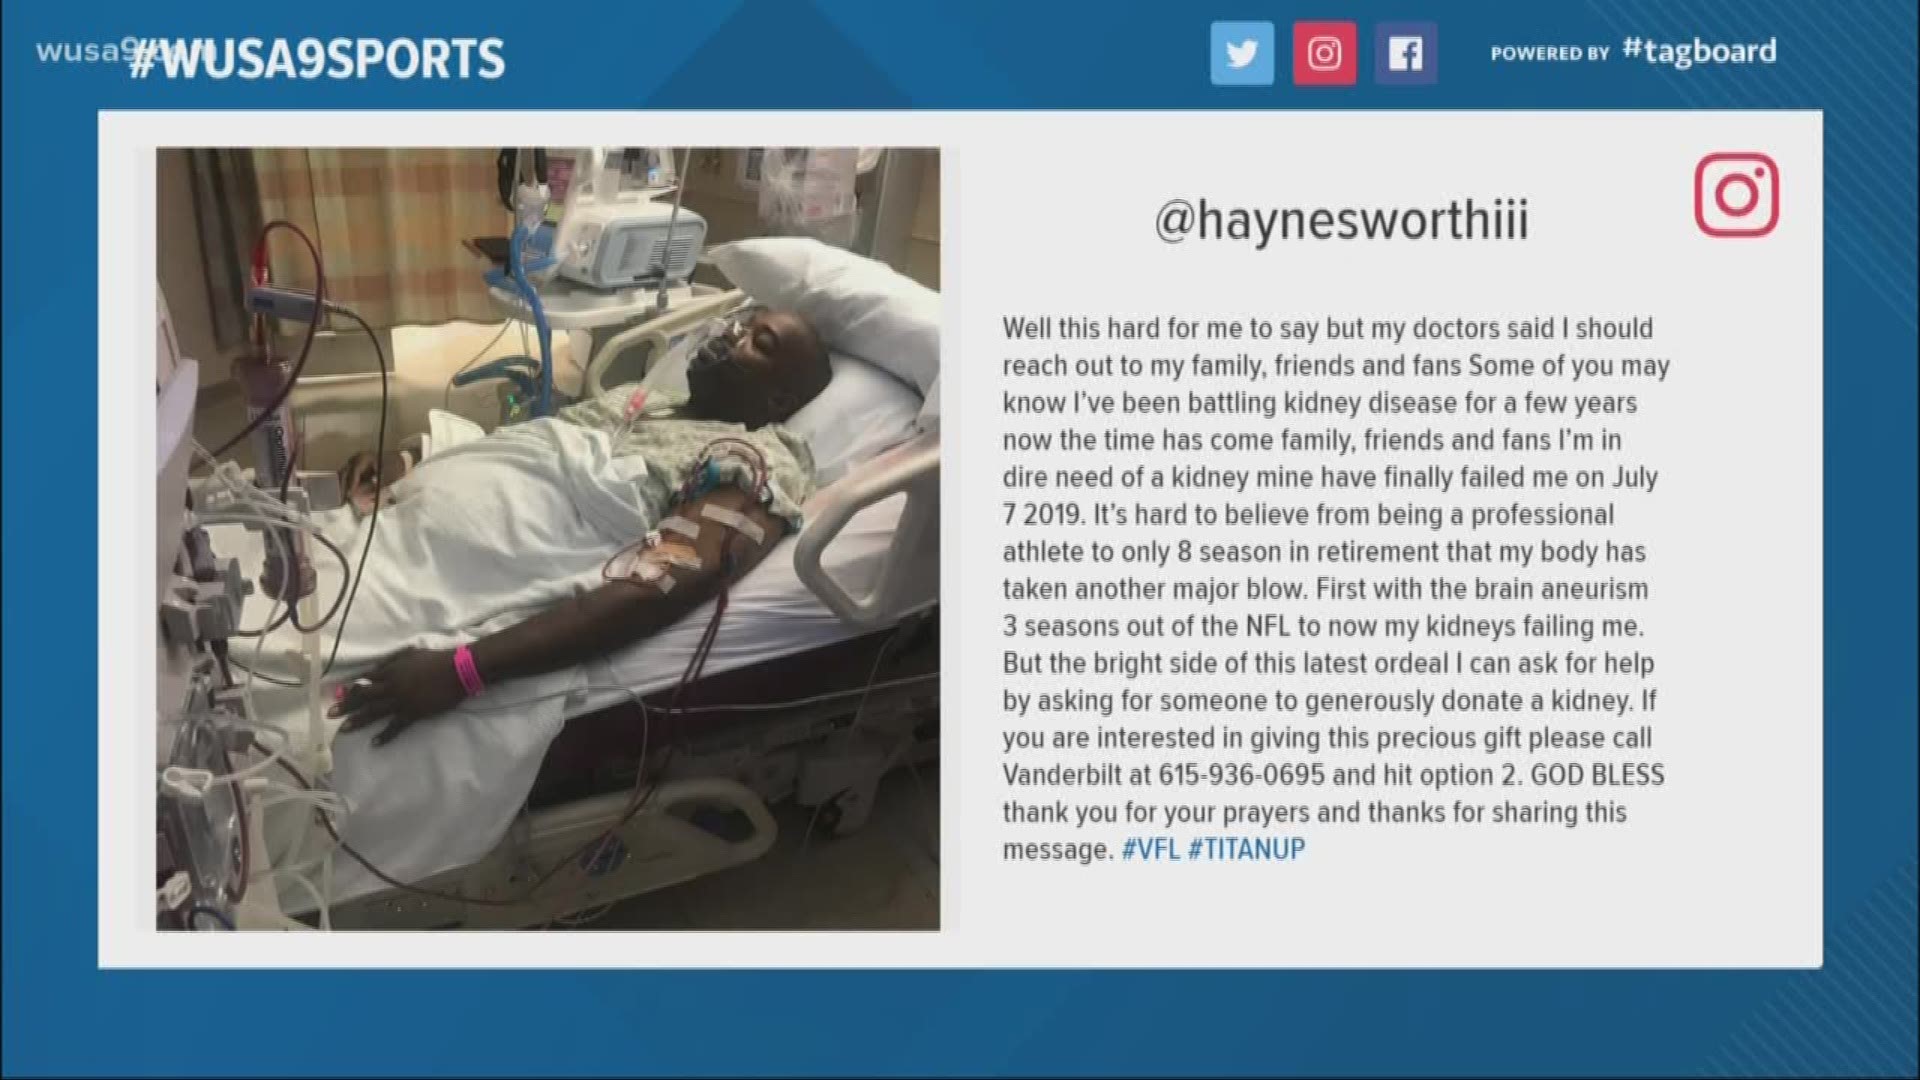 The former defensive lineman posted on instagram that he's "in dire need of a kidney."